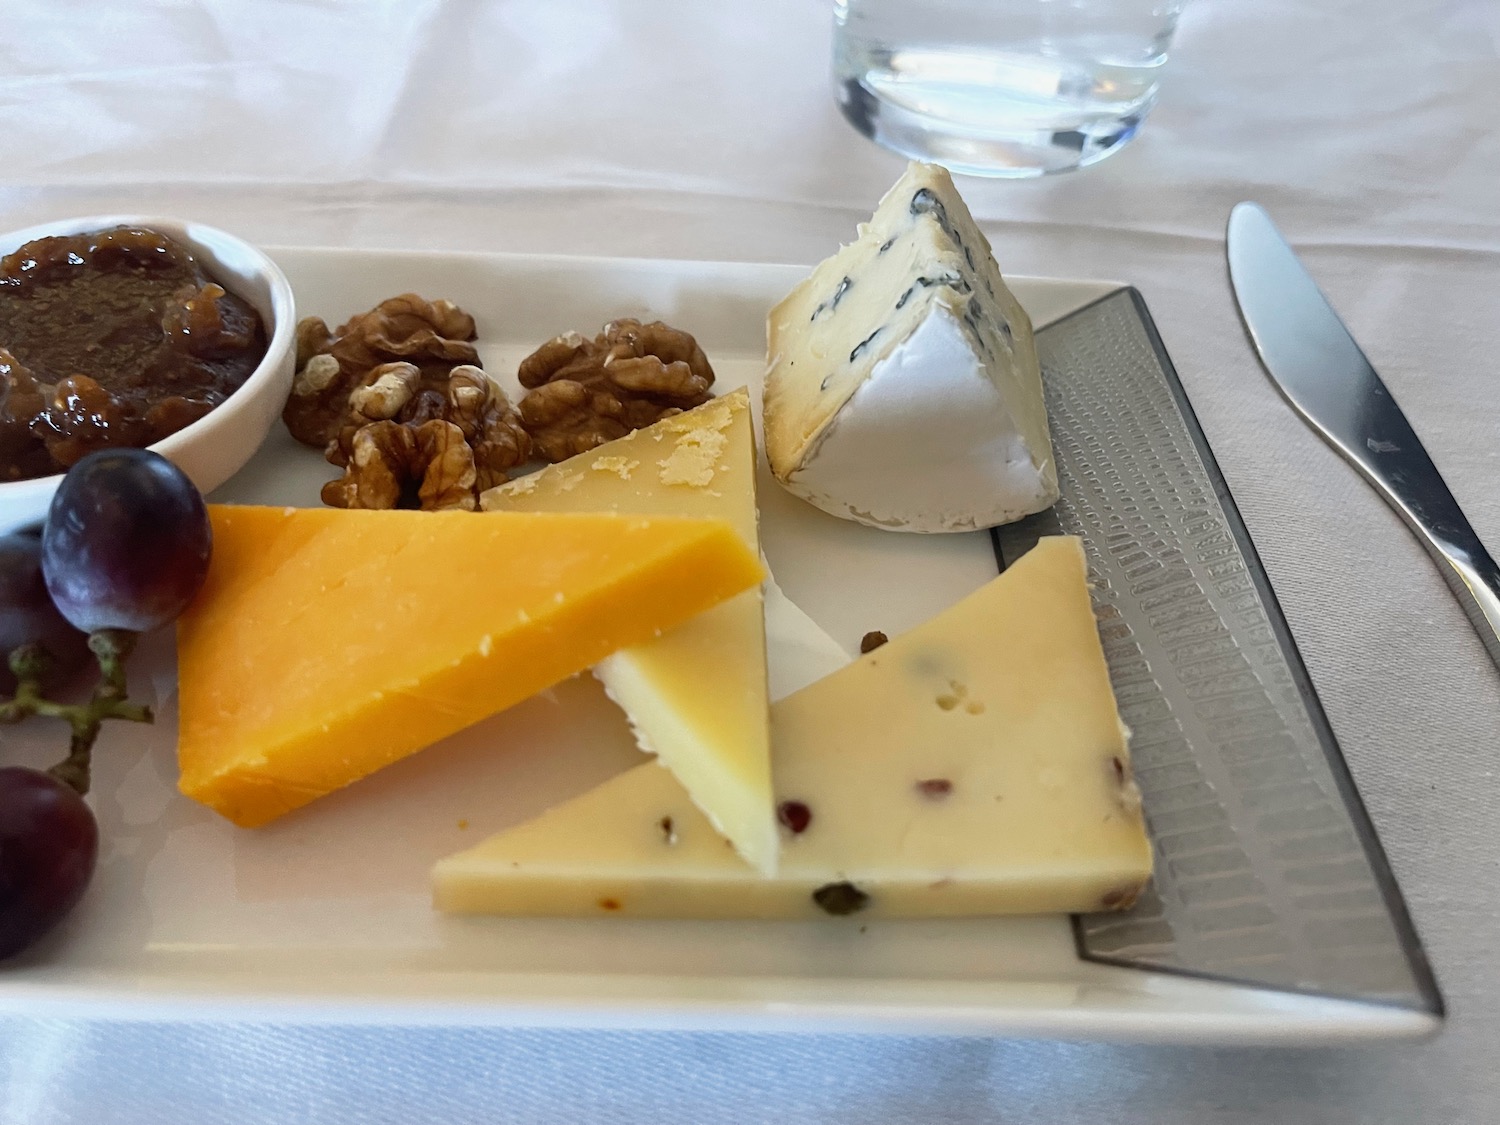 a plate of cheese and fruit